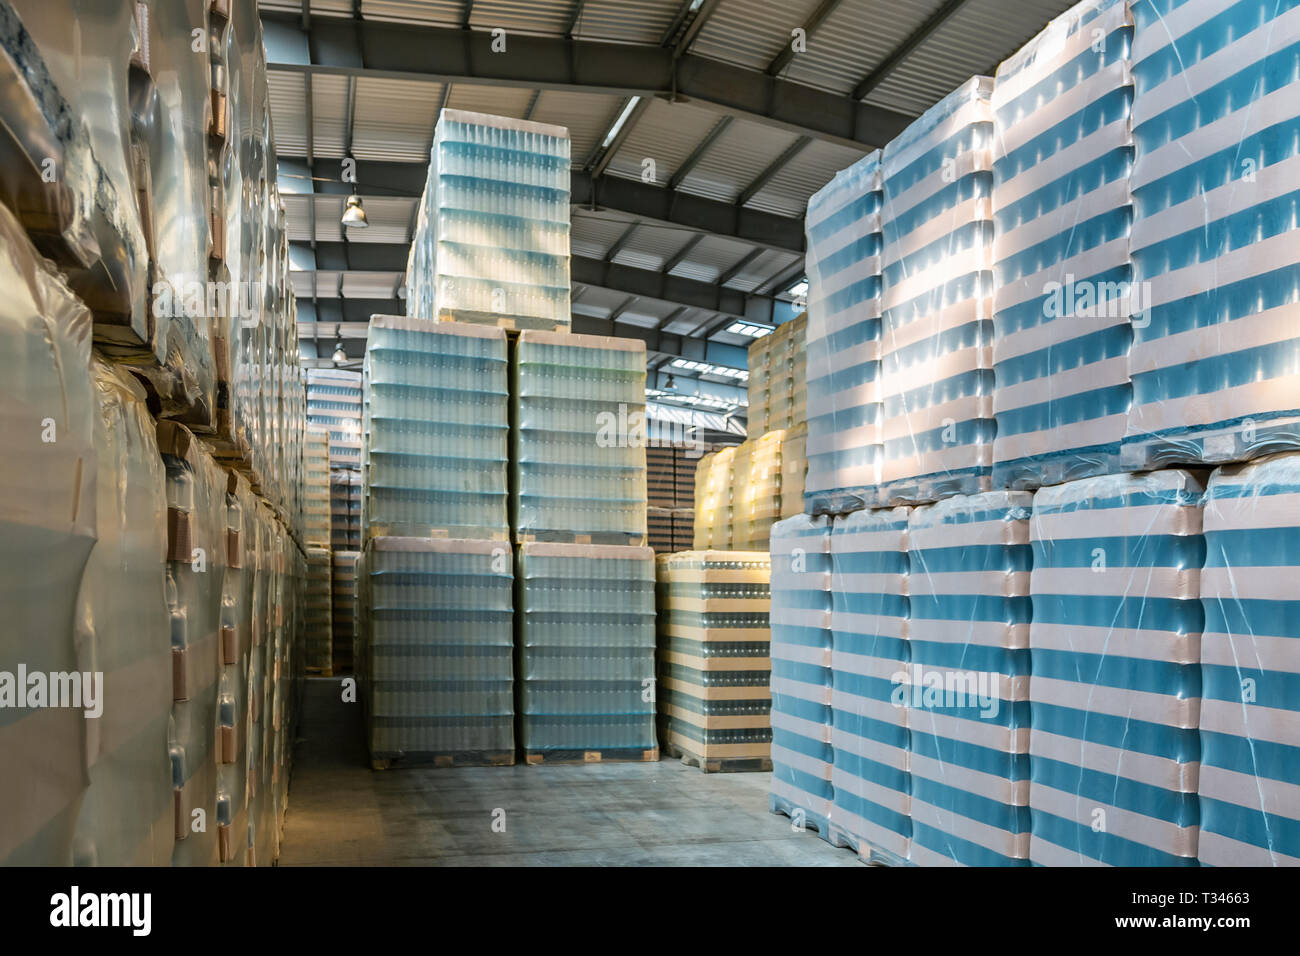 Large modern storehouse with some goods. Factory building or warehouse building with packed goods ready to ship. Warehouse with packed glass bottles.  Stock Photo